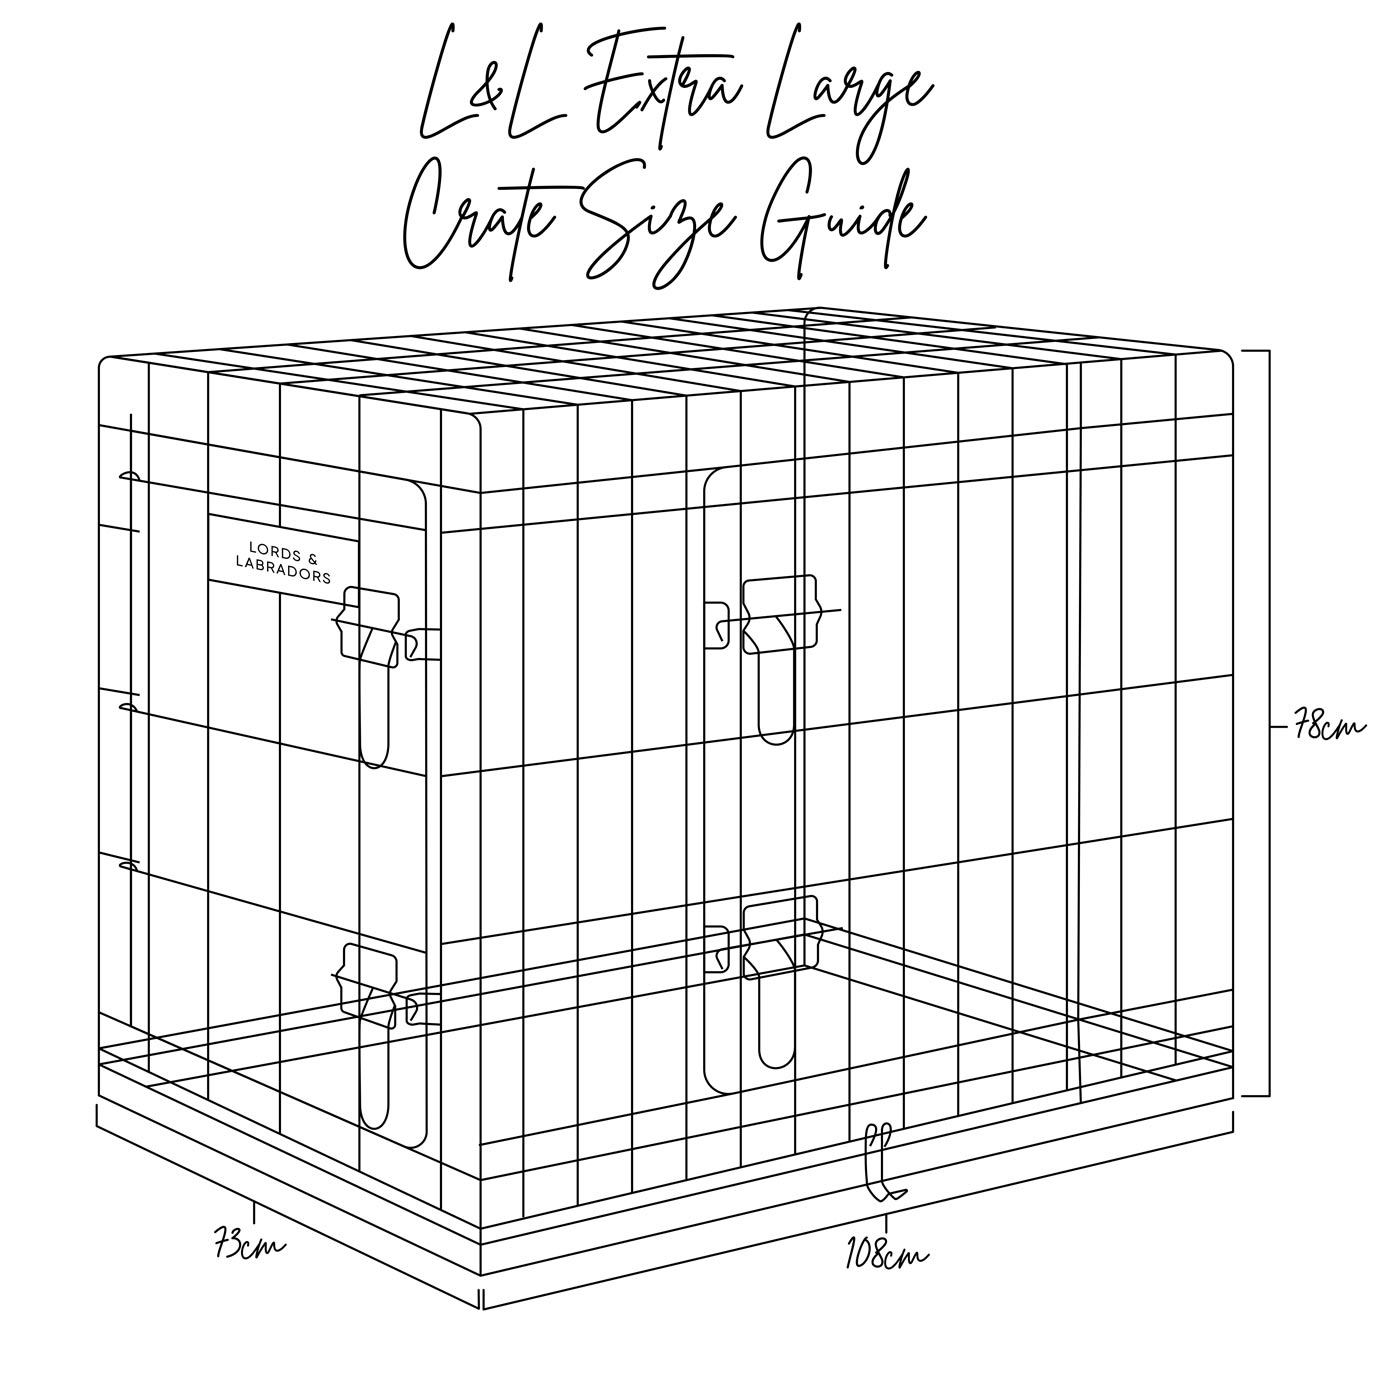 Lords and Labradors extra large crate size guide illustration